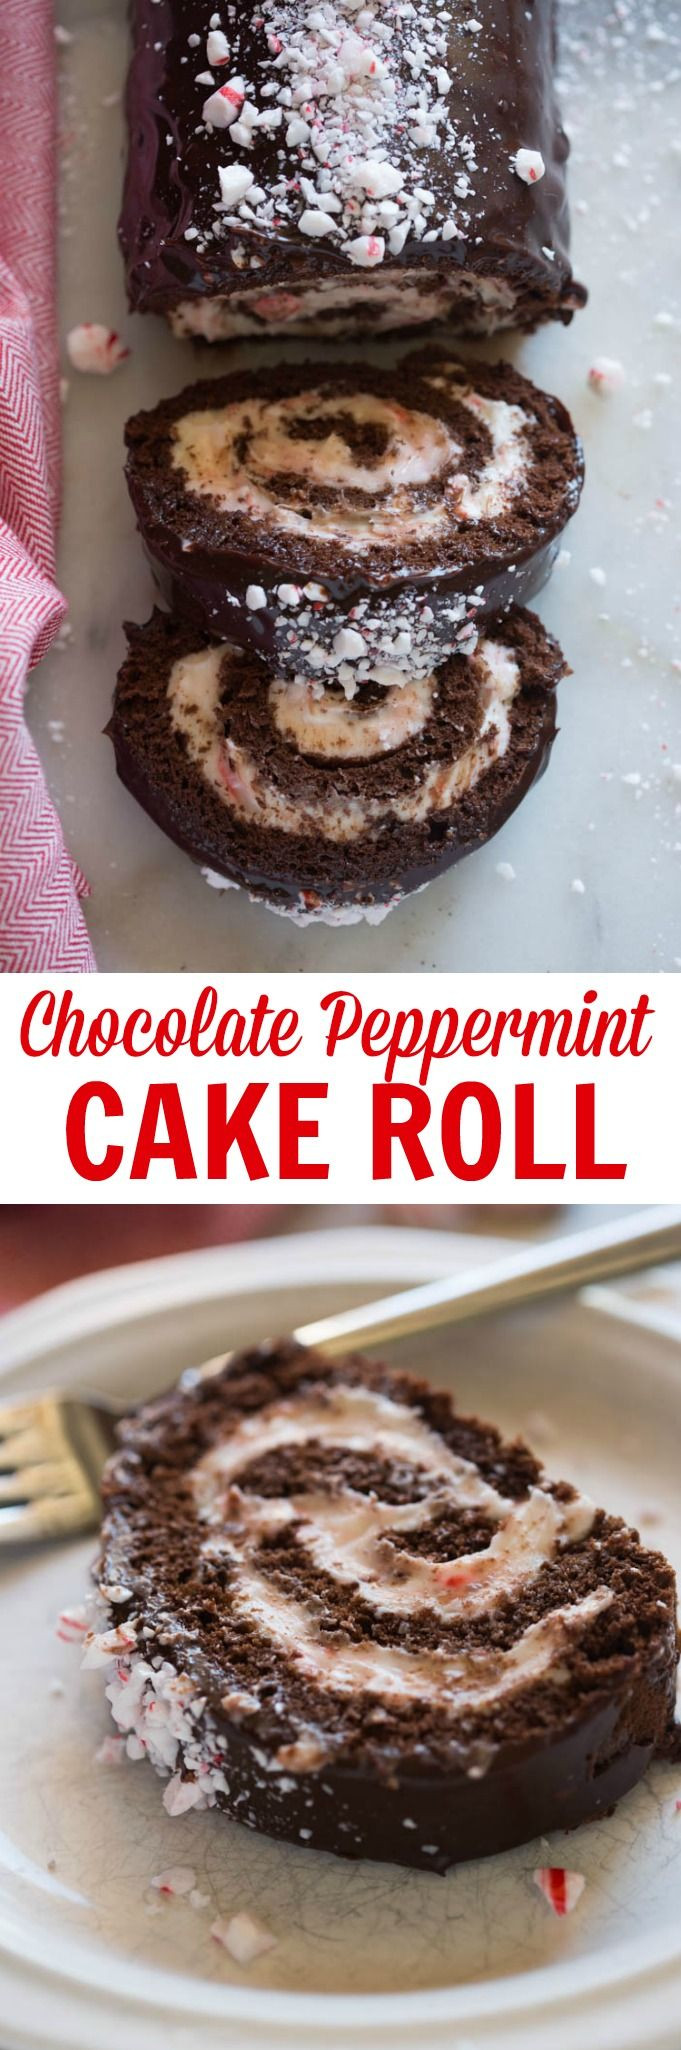 Chocolate Cake Roll With Cream Cheese Filling
 Chocolate Peppermint Cake Roll Recipe